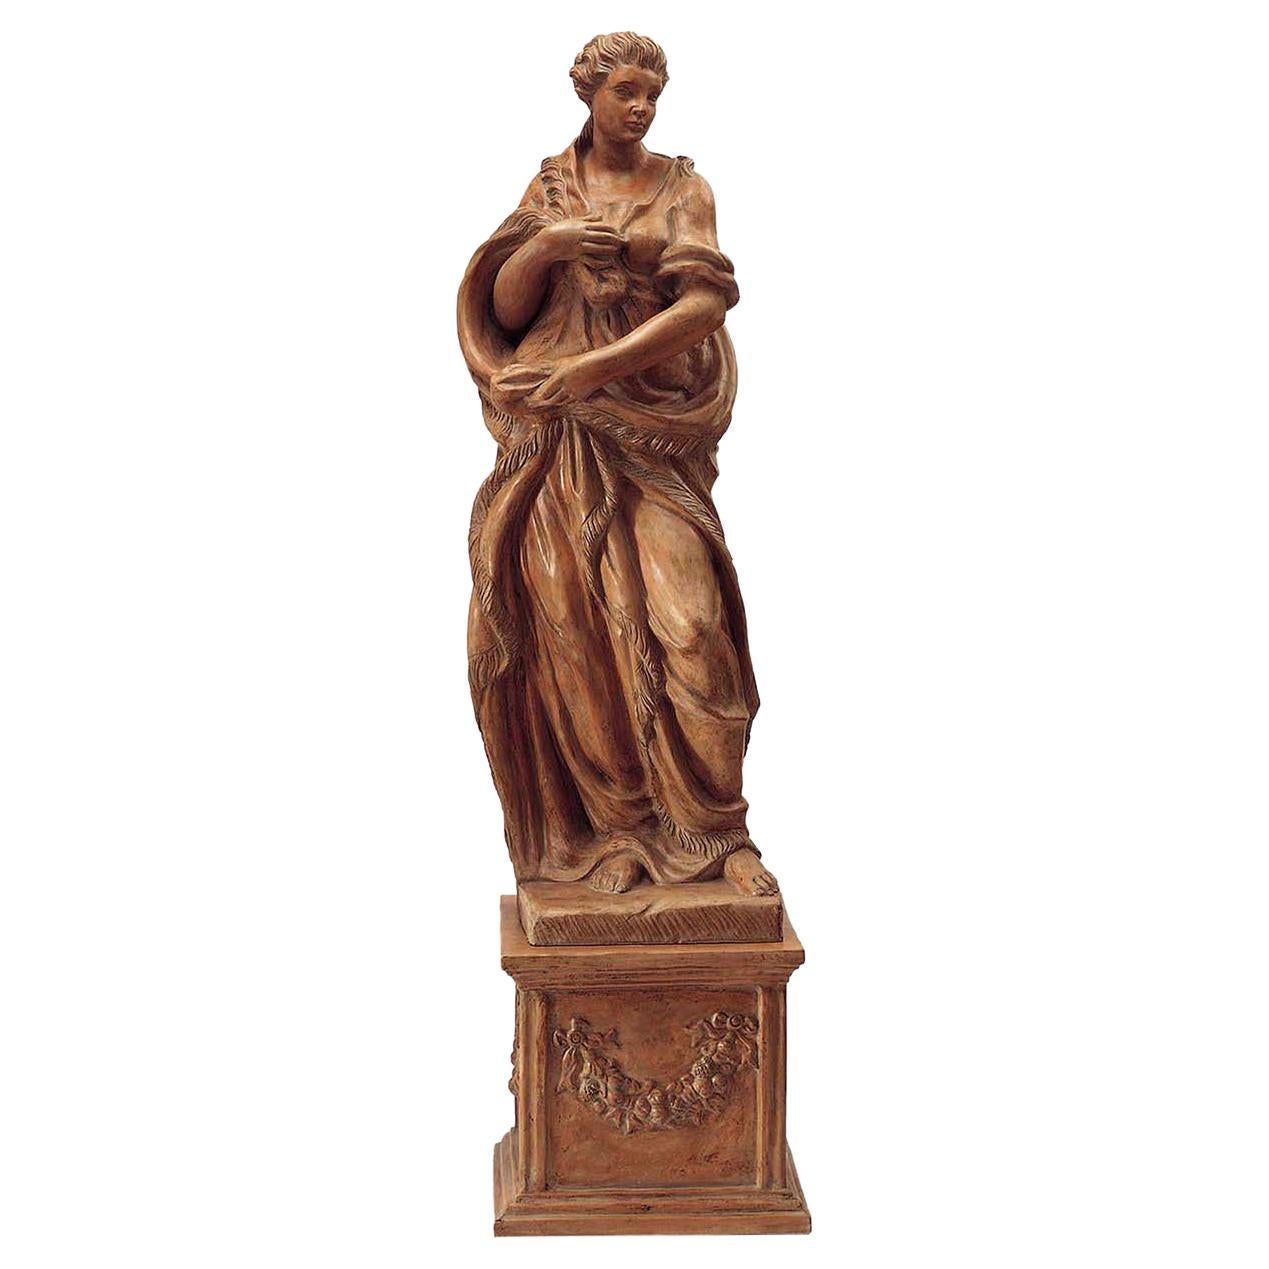 An exquisite celebration of Florentine Renaissance, this stupendous sculpture embodies the glorious allegros of Winter. Depicting an elegant lady protecting herself with heavy clothes from the cold weather, it is superbly handcrafted of ceramic